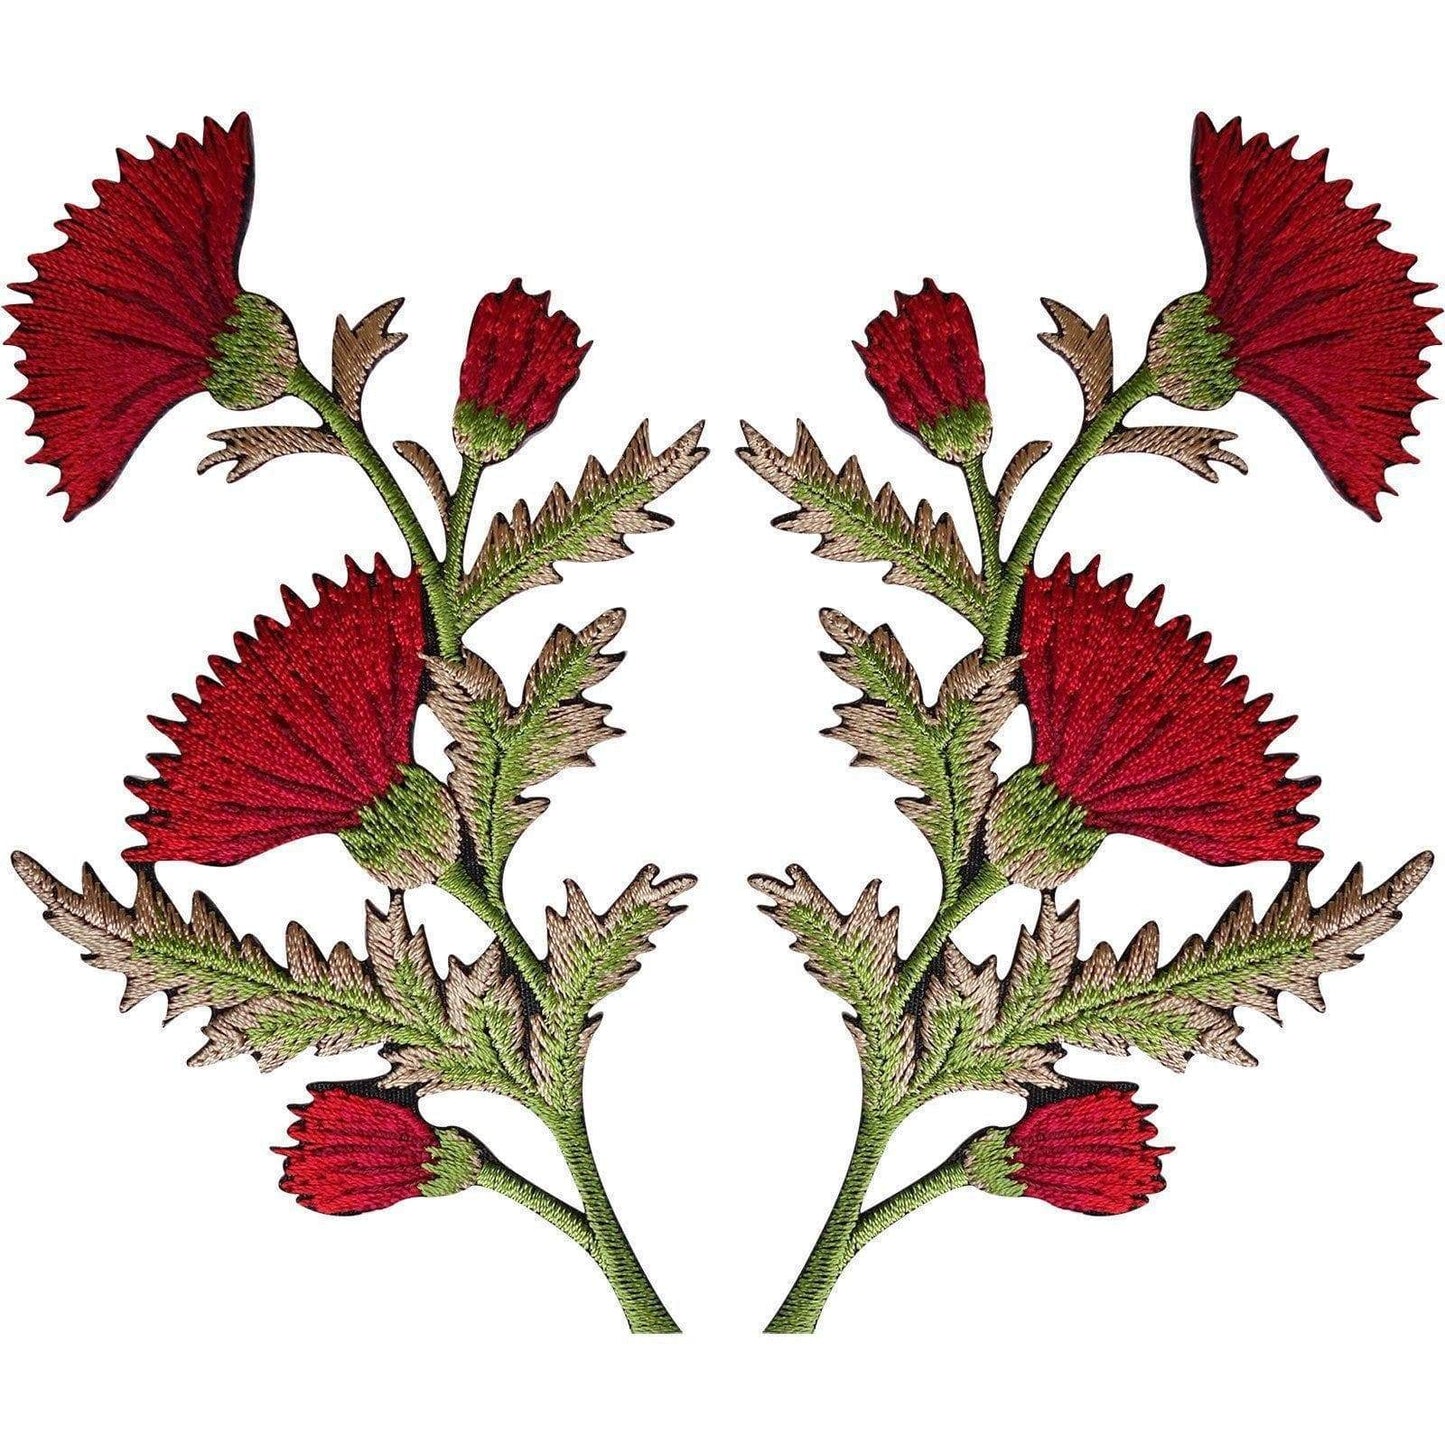 Pair of Red Thistle Flower Patches Iron / Sew On Embroidered Patch Badge Flowers